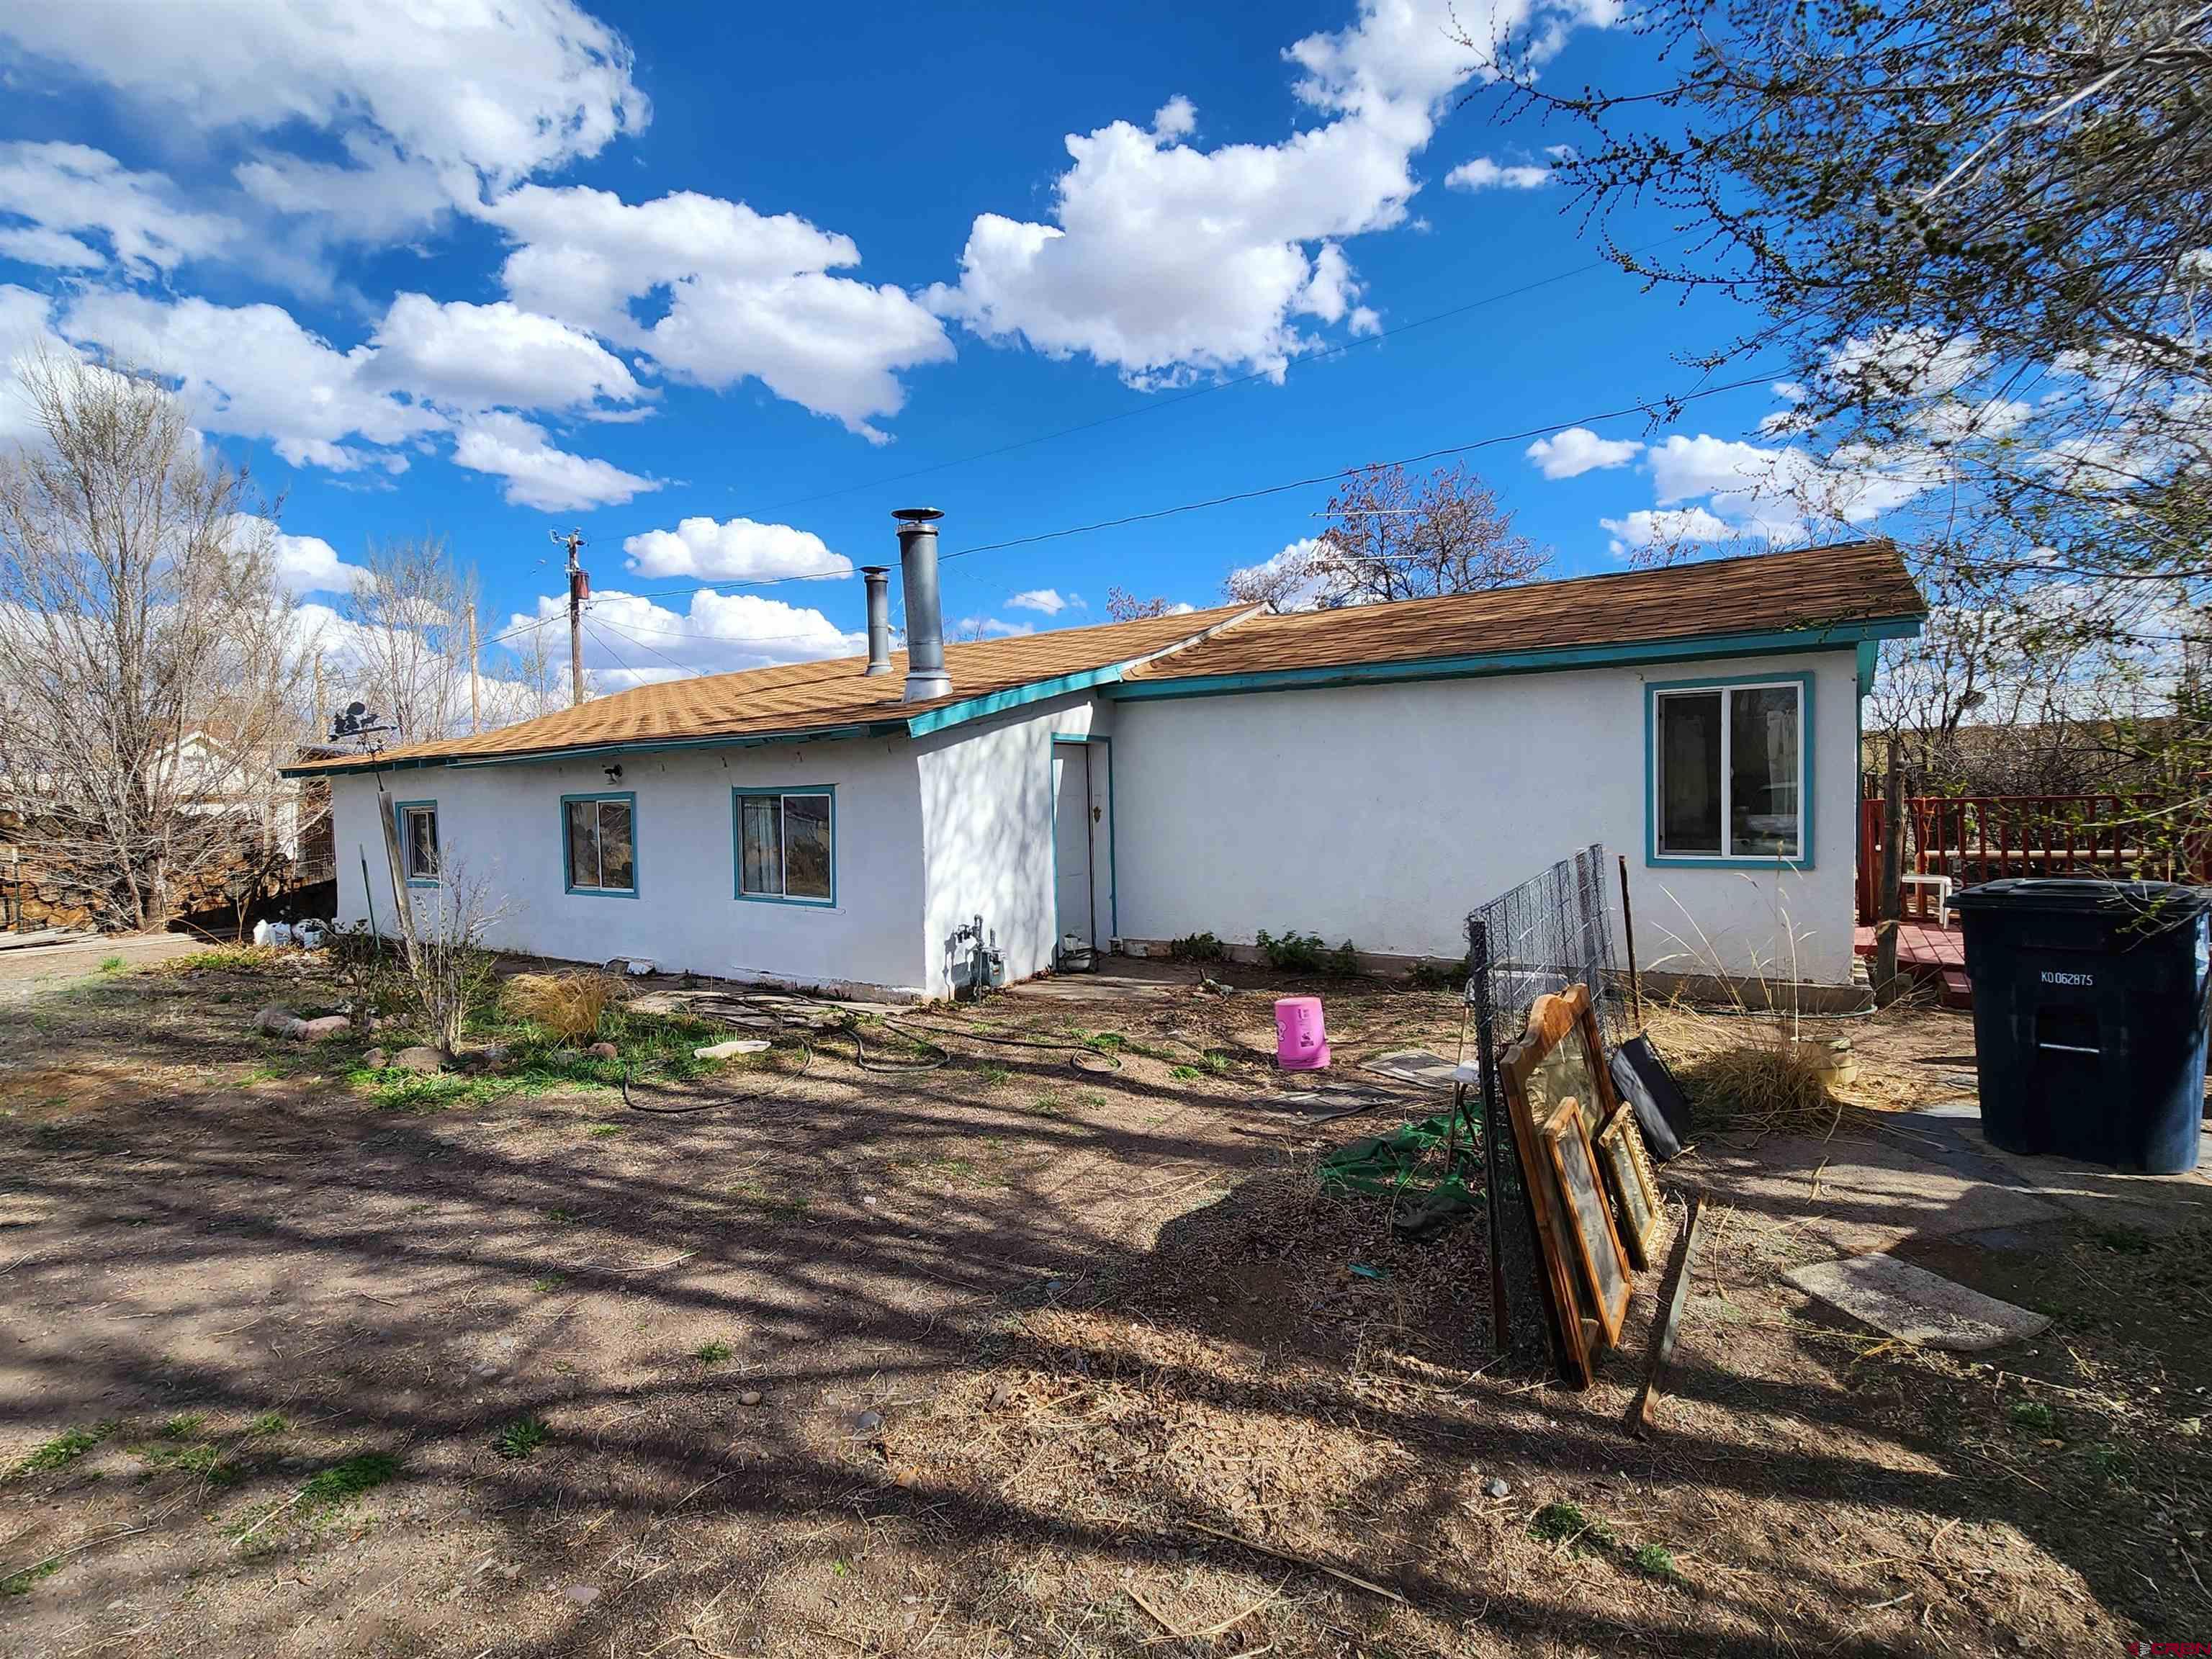 Photo of 112 W 12th Ave in Antonito, CO